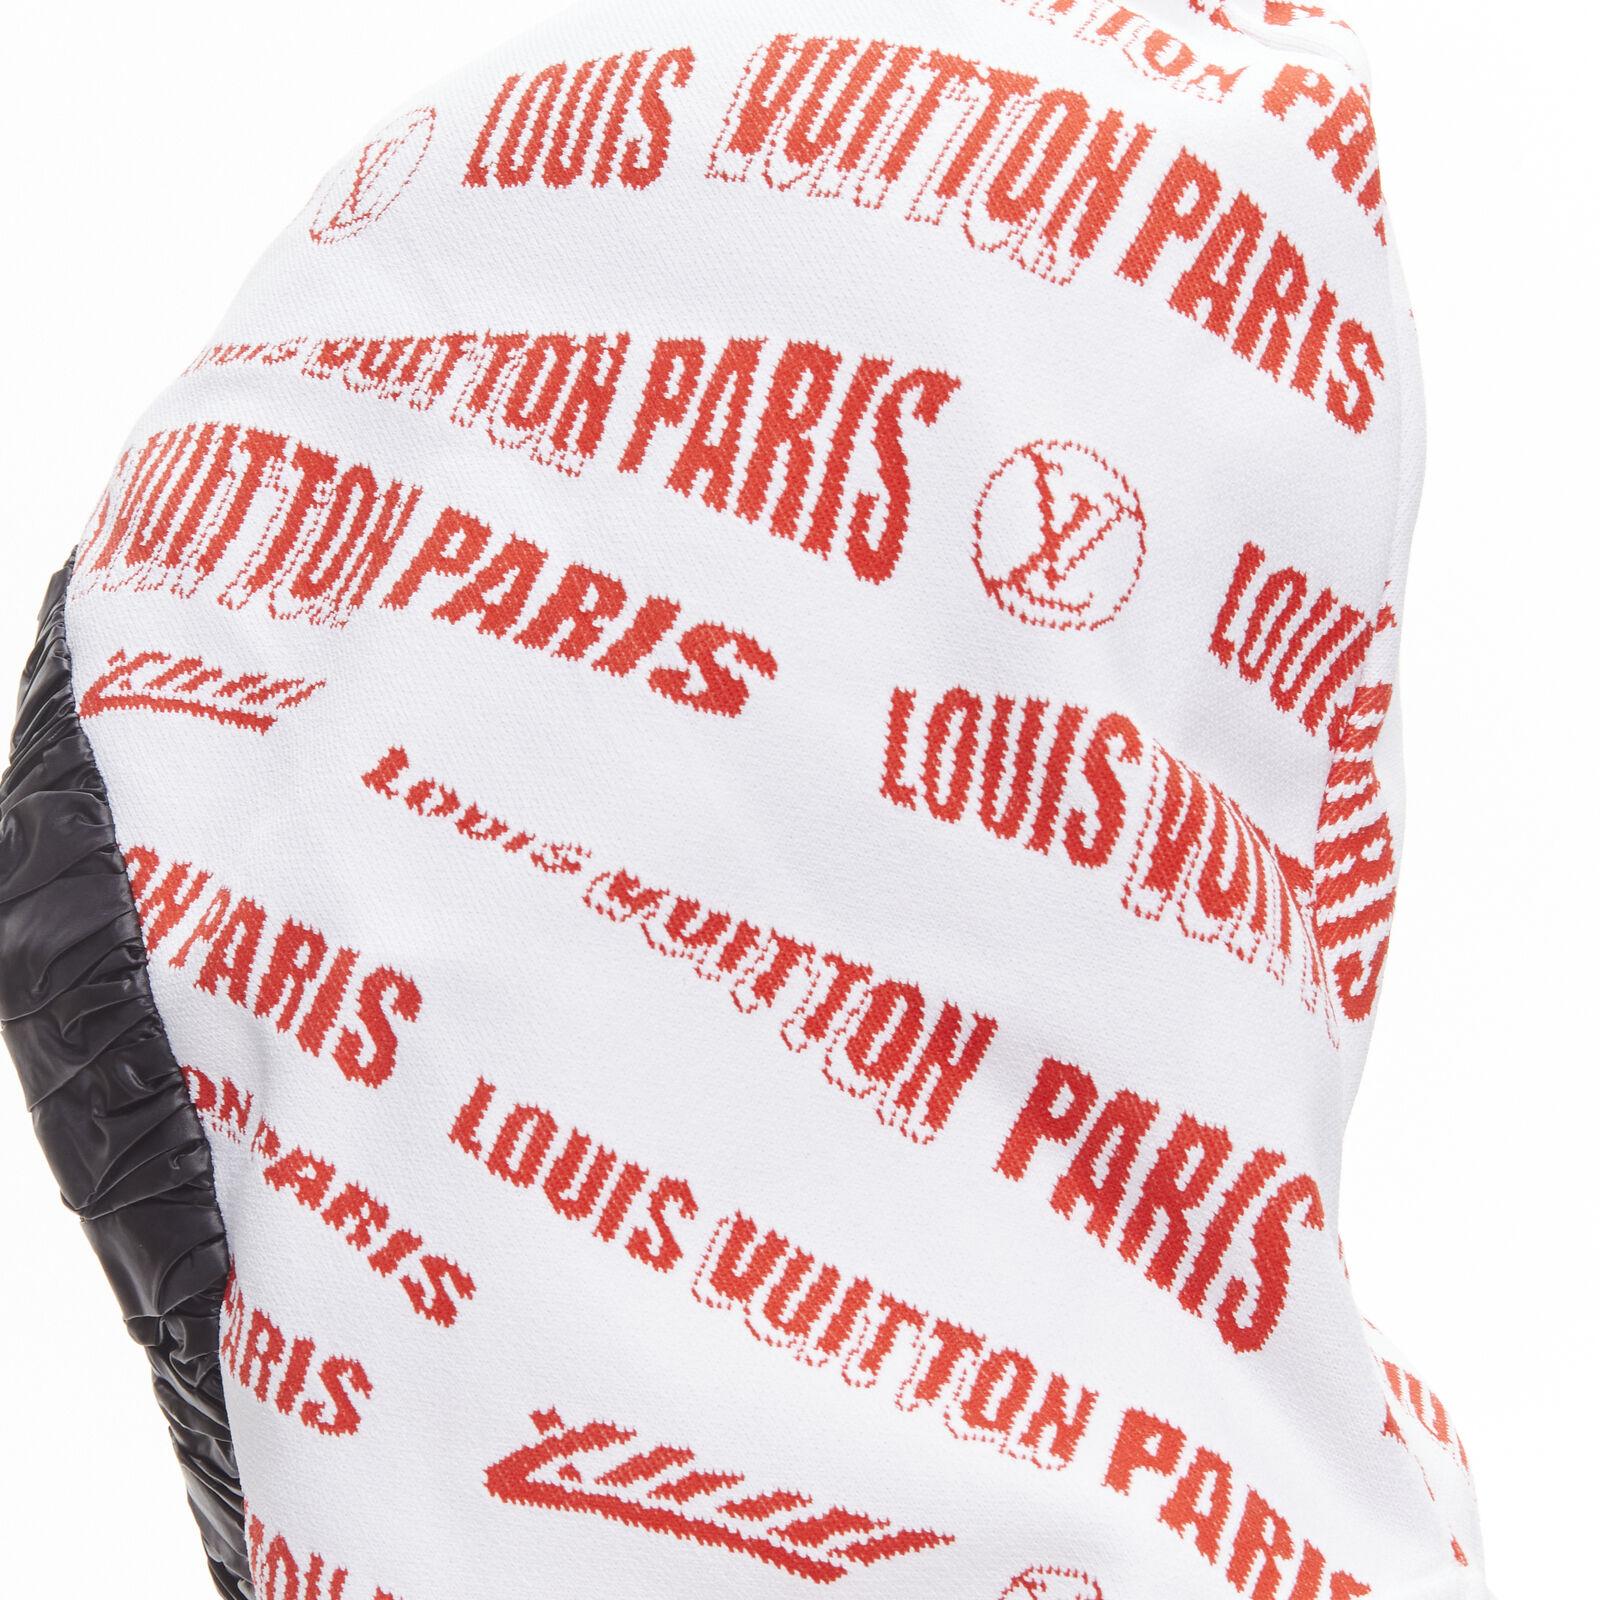 LOUIS VUITTON FORNASETTI 2021 white red logo jacquard nylon trim snood hood hat
Reference: AAWC/A00081
Brand: Louis Vuitton
Designer: Nicolas Ghesquiere
Collection: Fornasetti 2021 - Runway
Material: Viscose, Polyamide
Color: White, Red
Pattern: